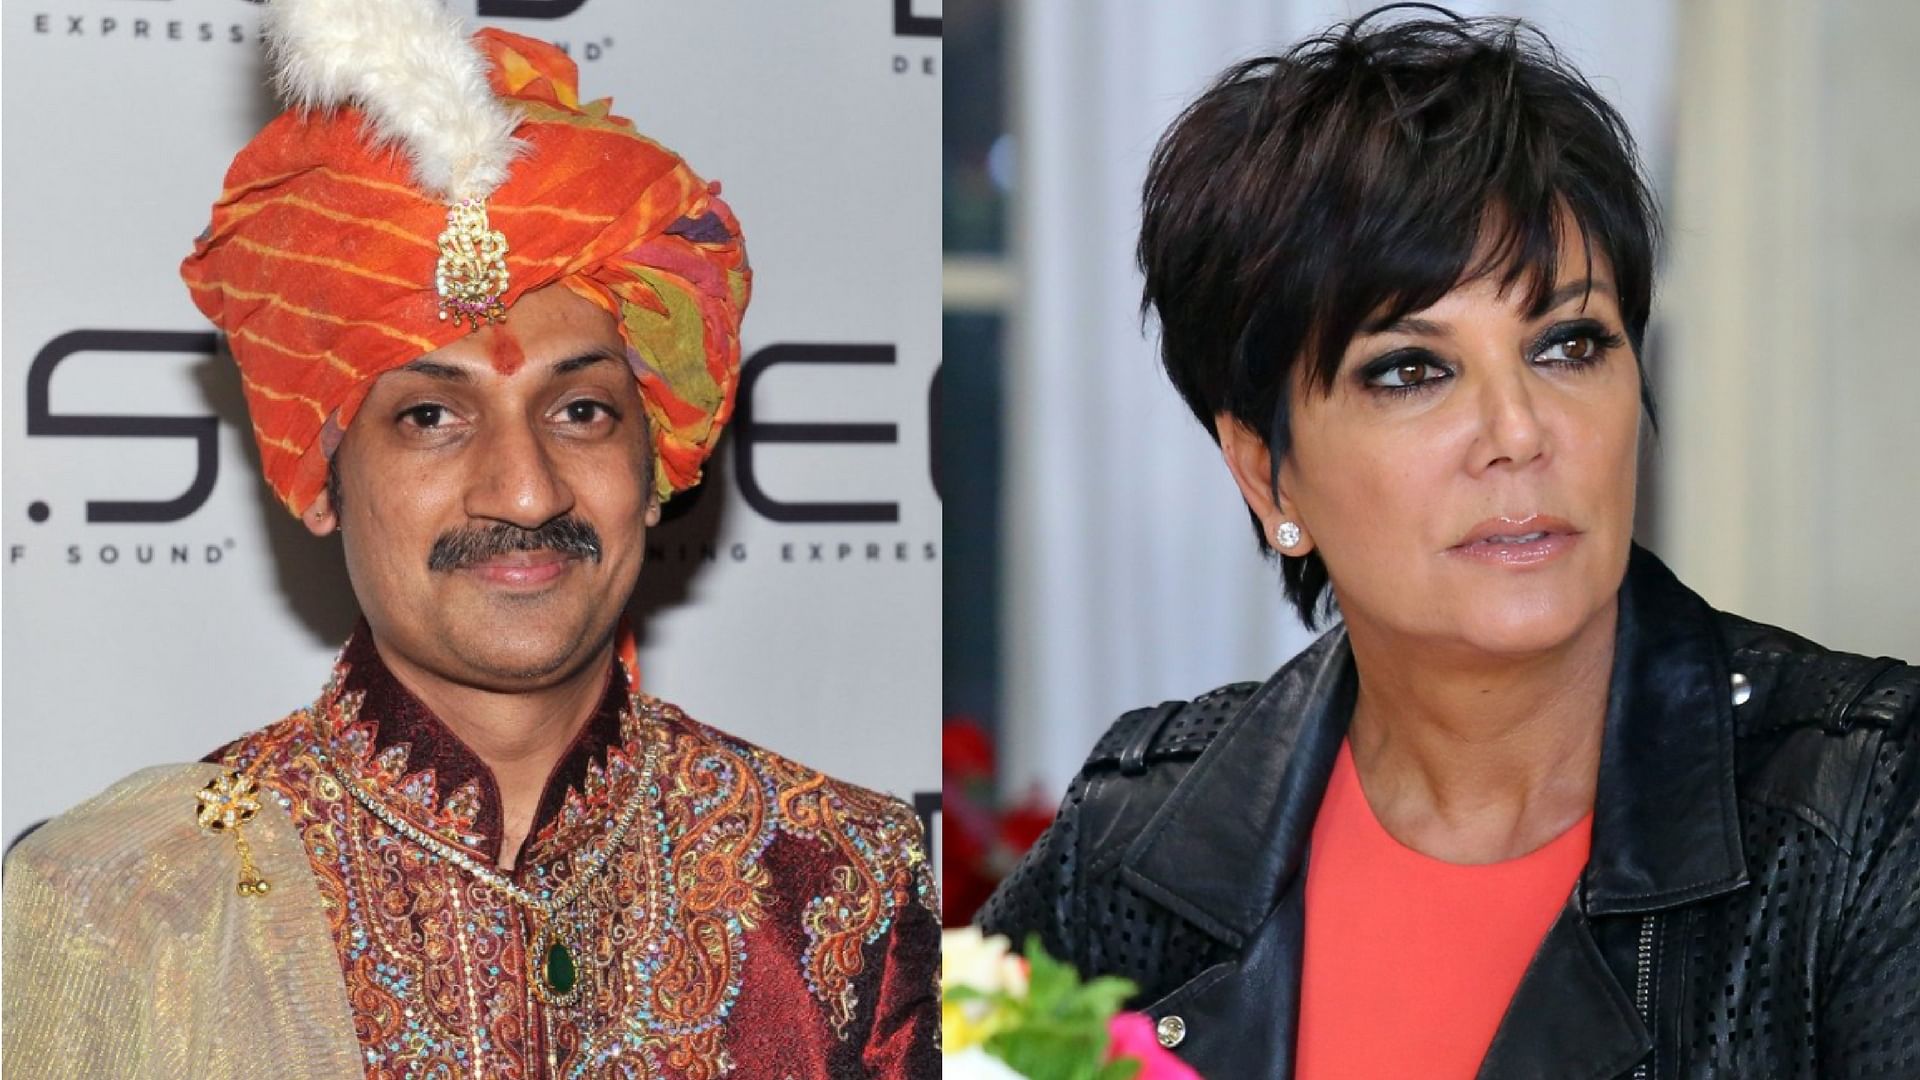 Prince Manvendra Singh Gohil has a heart to heart with Kris Jenner.